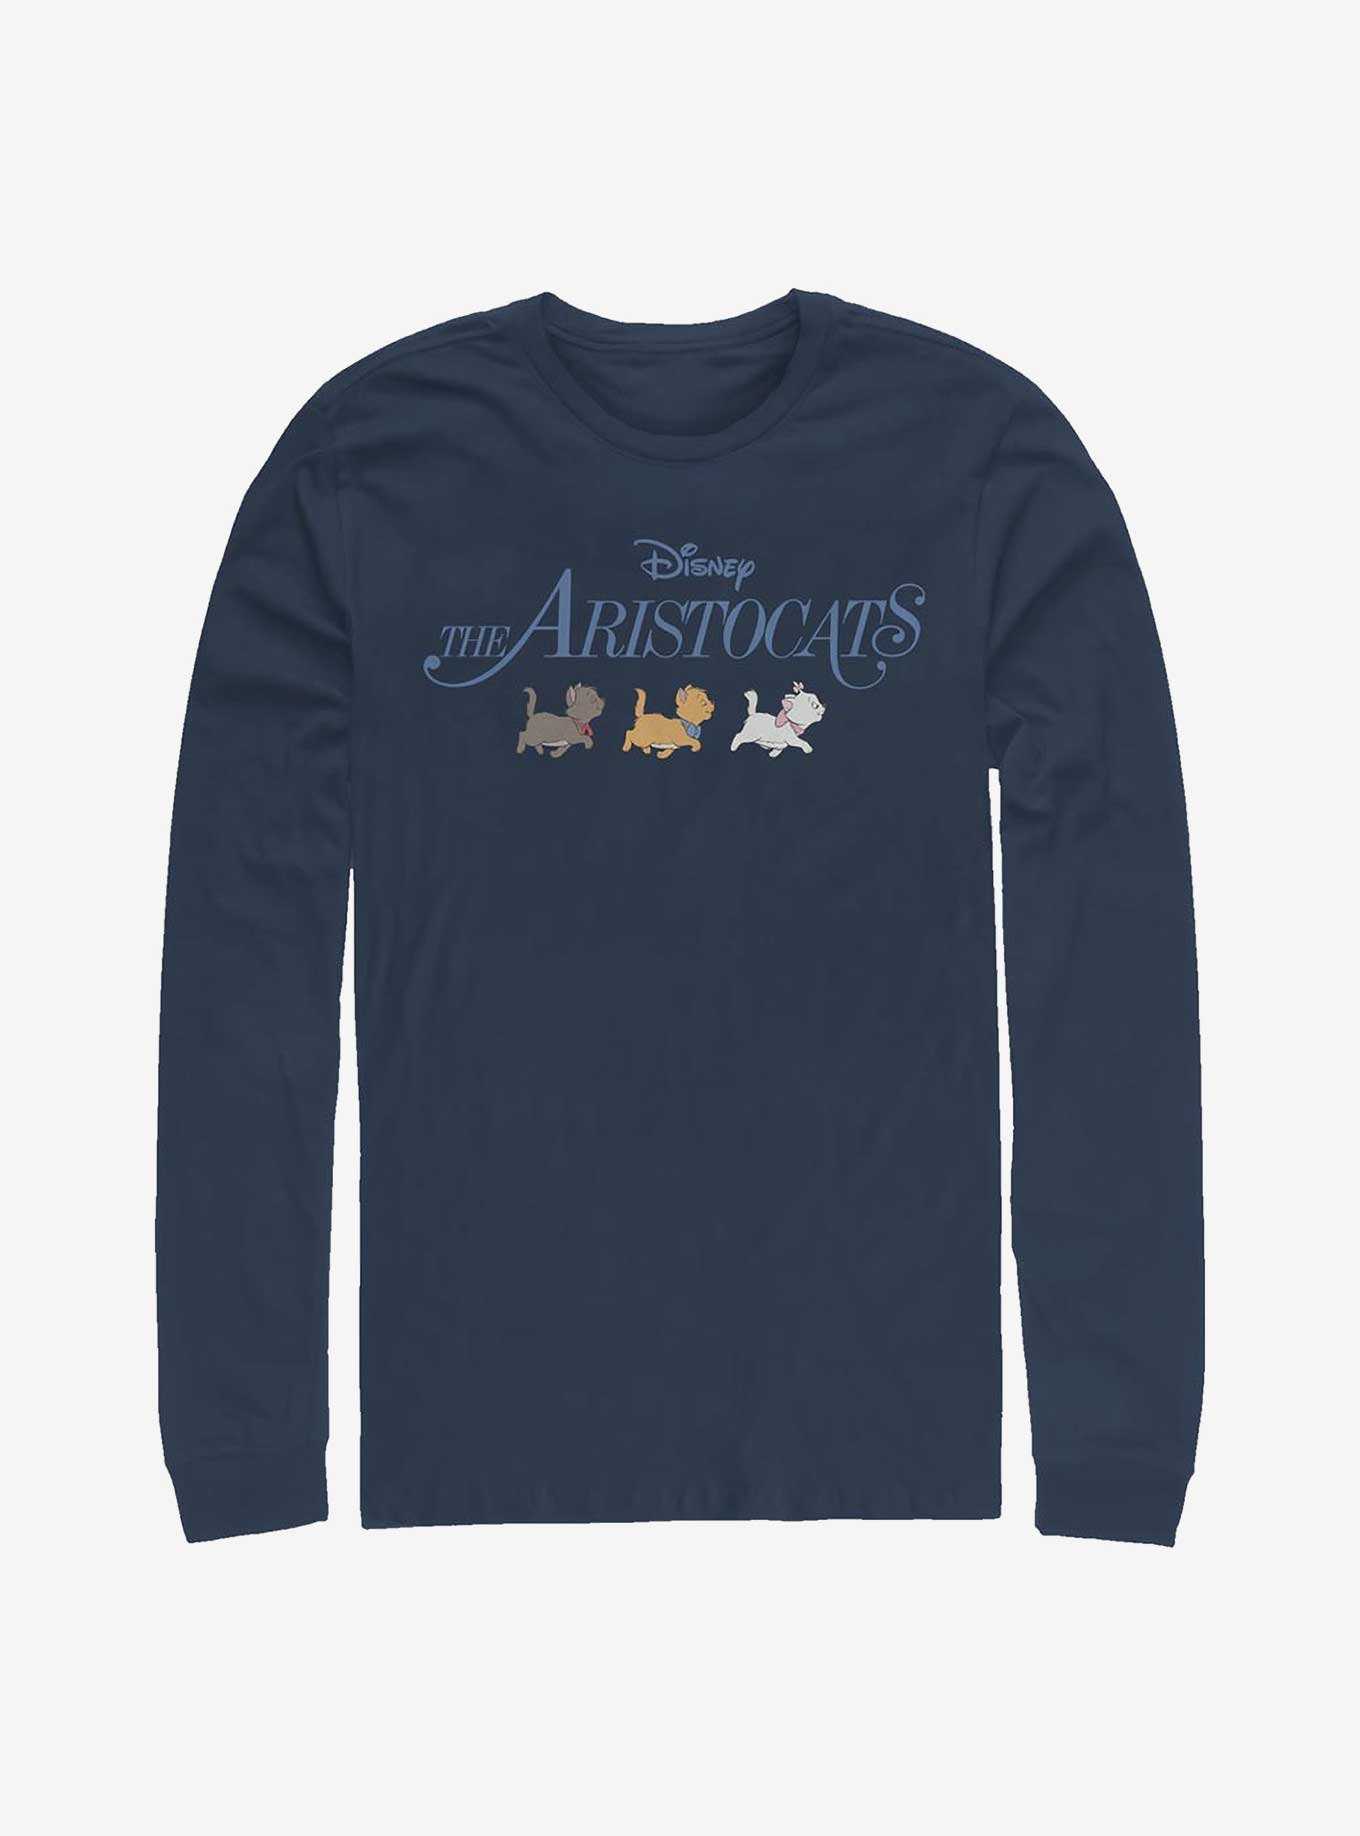 OFFICIAL The Aristocats Shirts, Gifts & | Merchandise Boxlunch